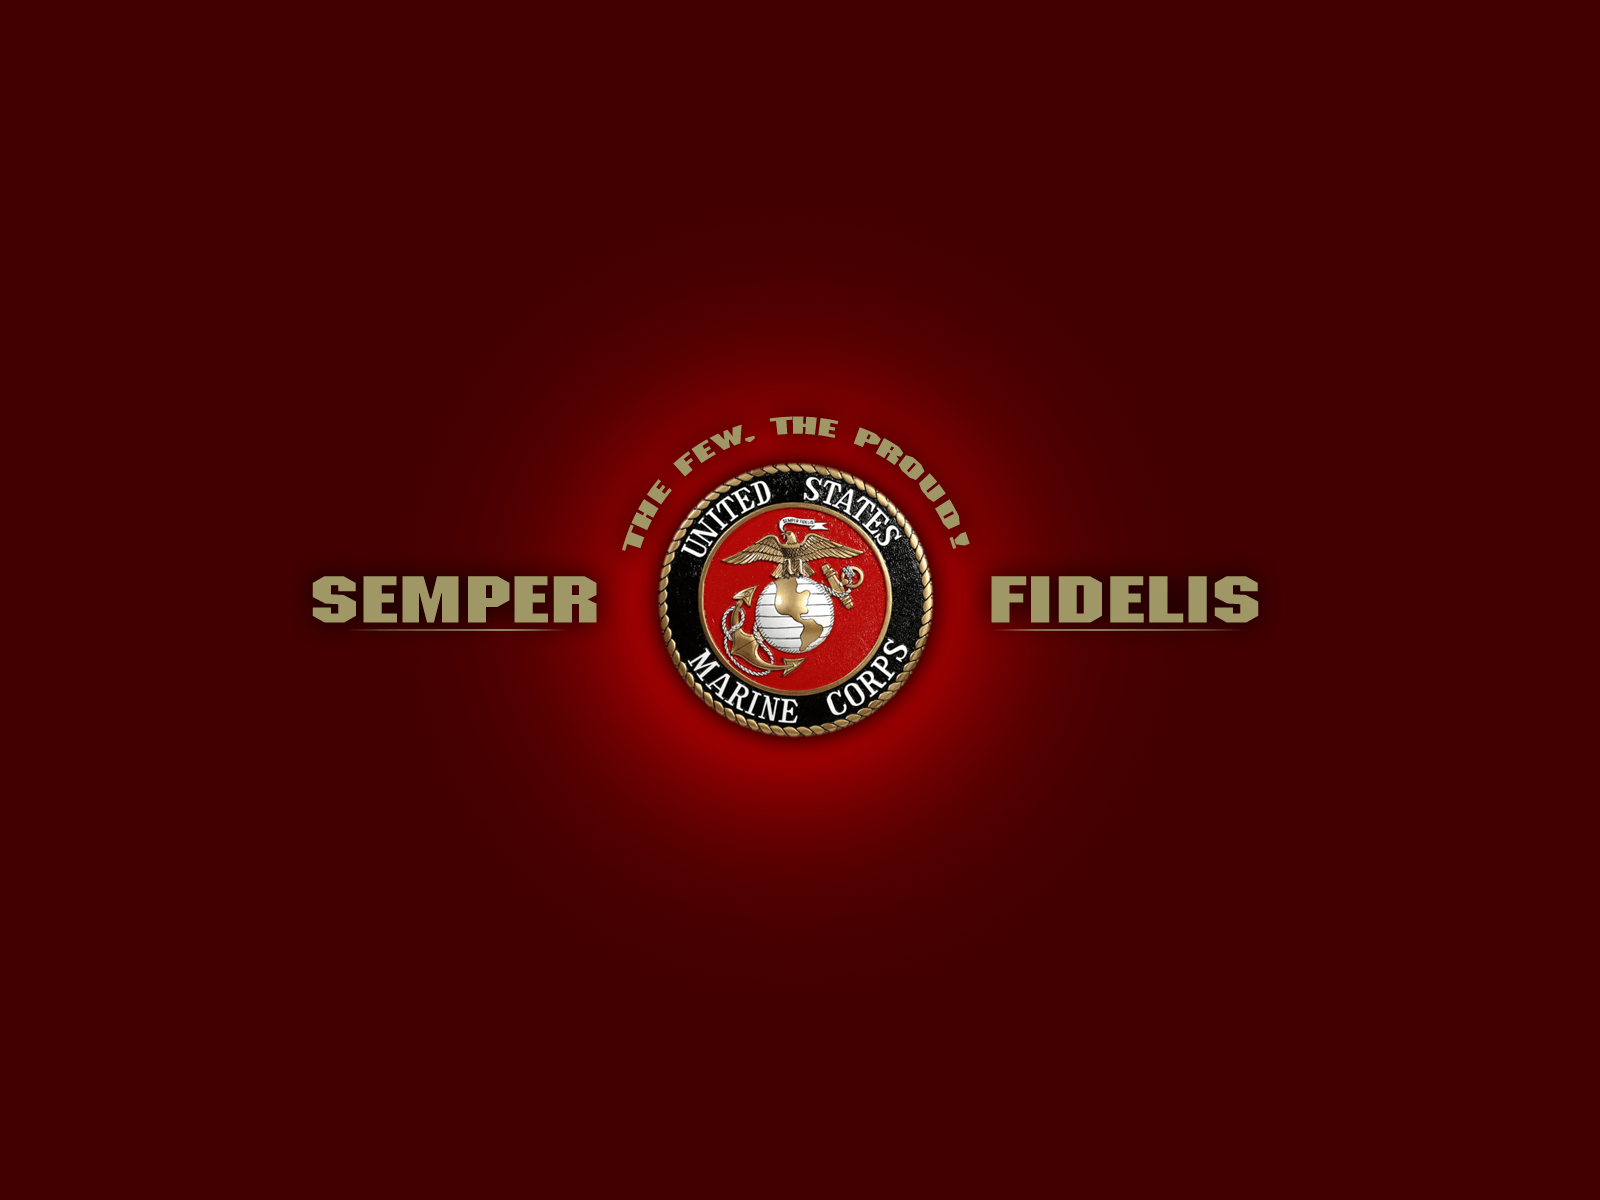 Us Marine Corps Wallpapers